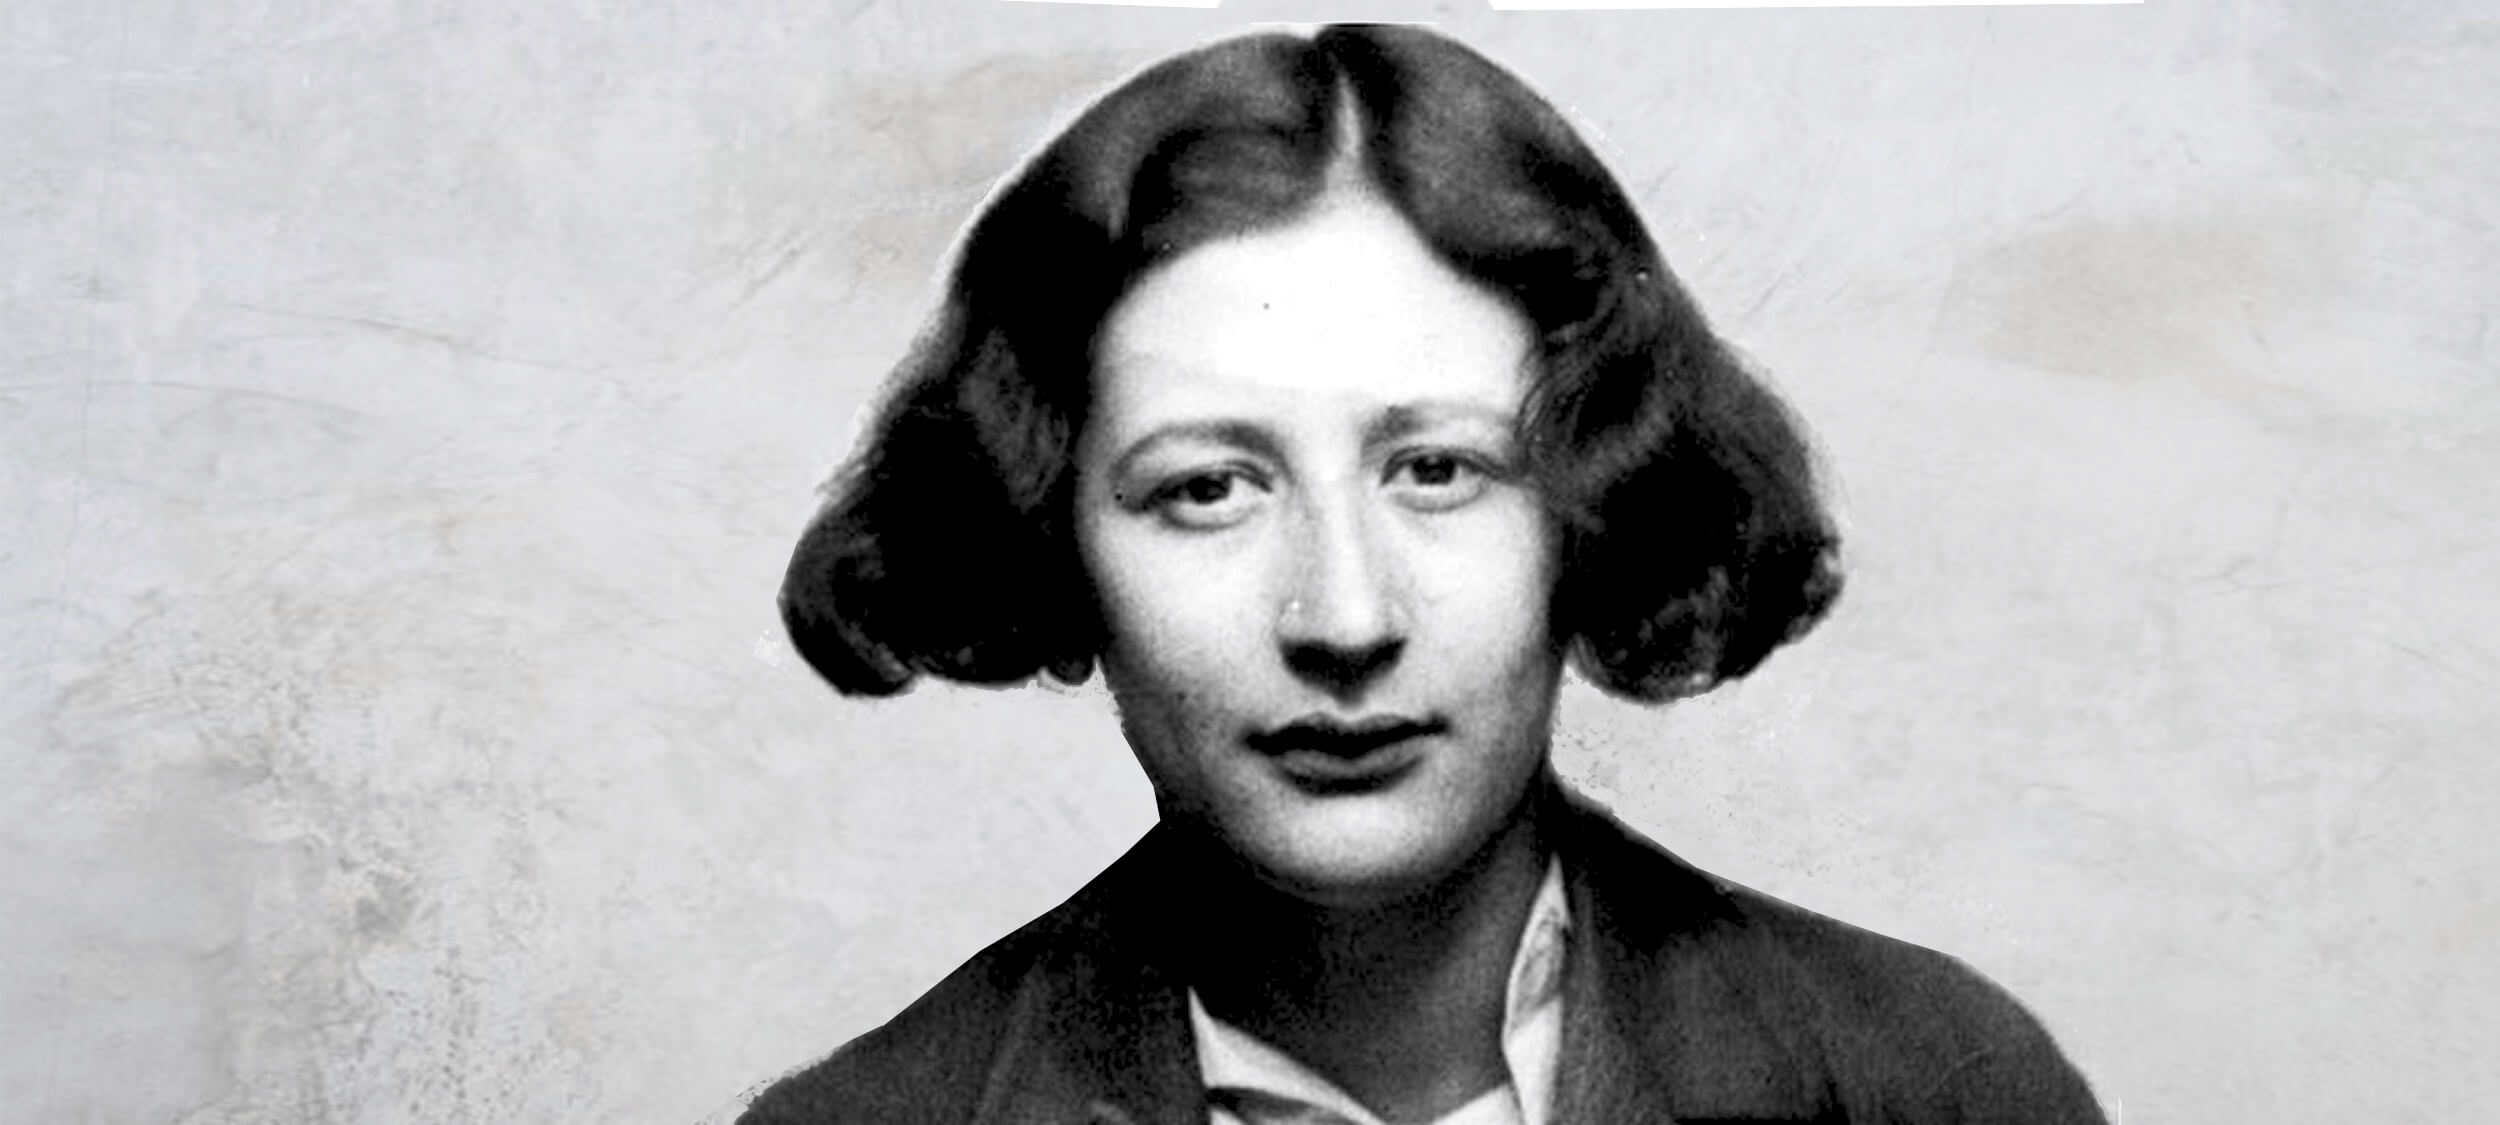 Waiting with Simone Weil